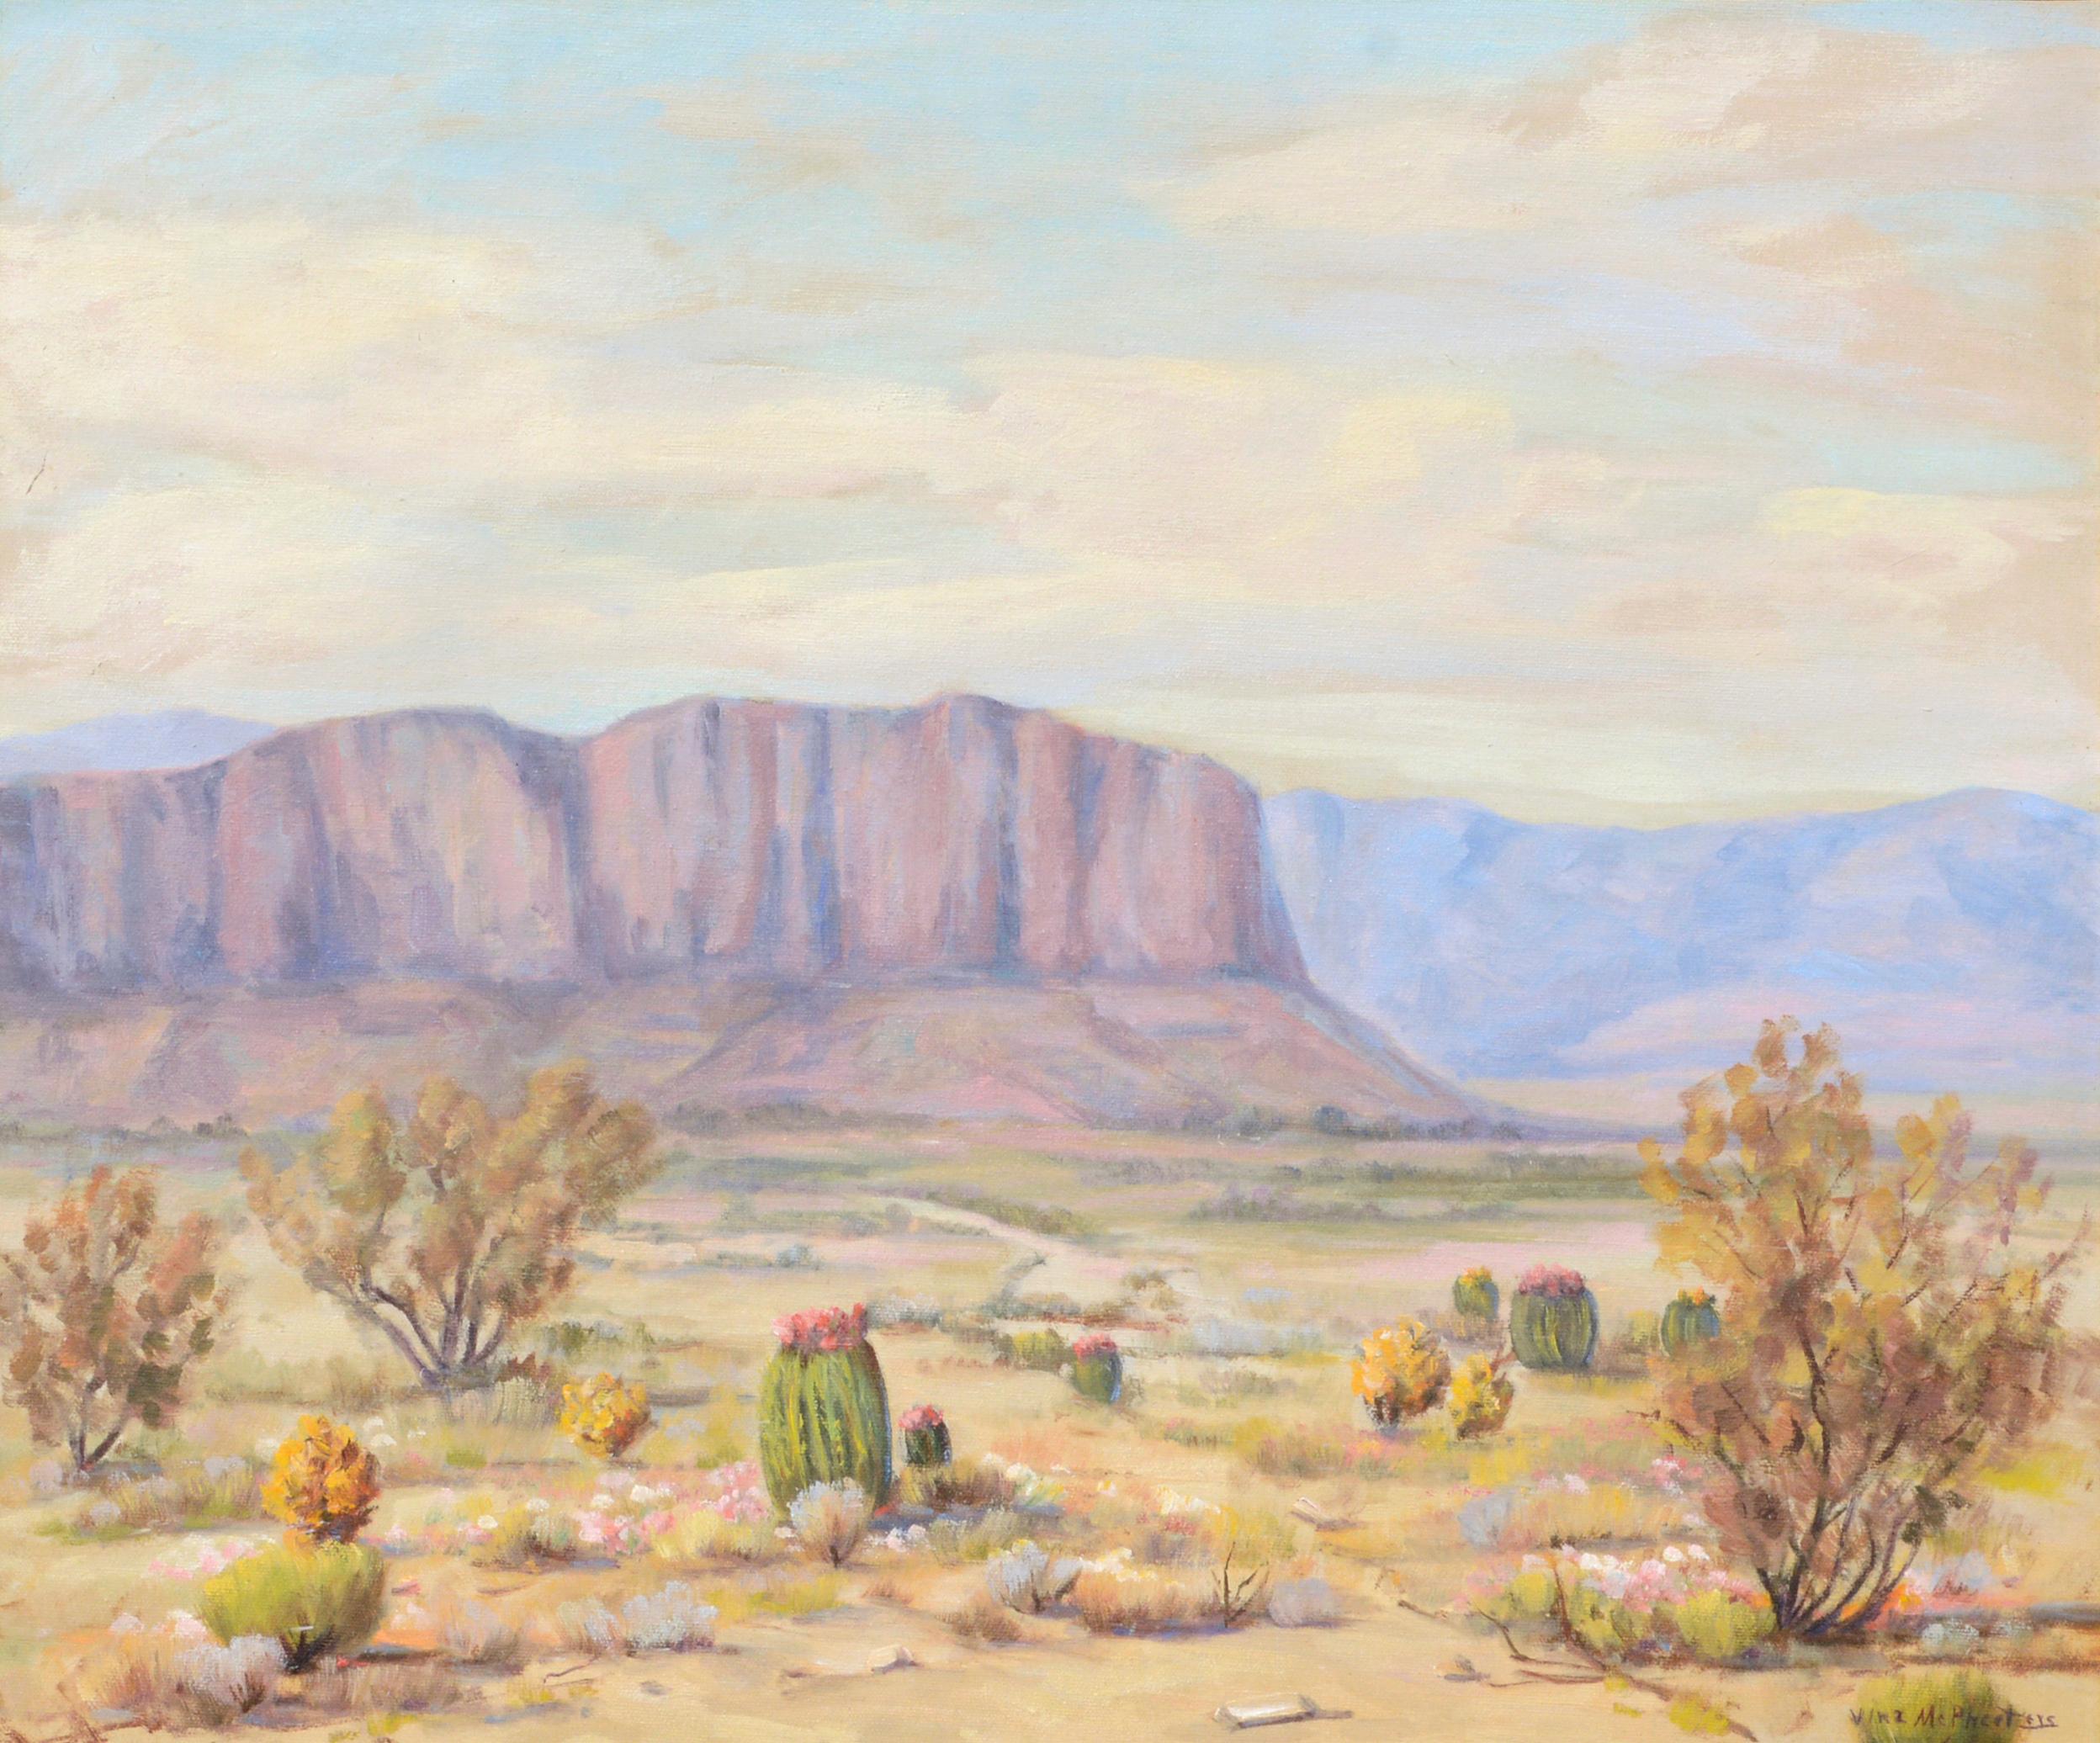 Mid Century Desert Mesa Landscape with Cacti  - Painting by Vina McPheeters